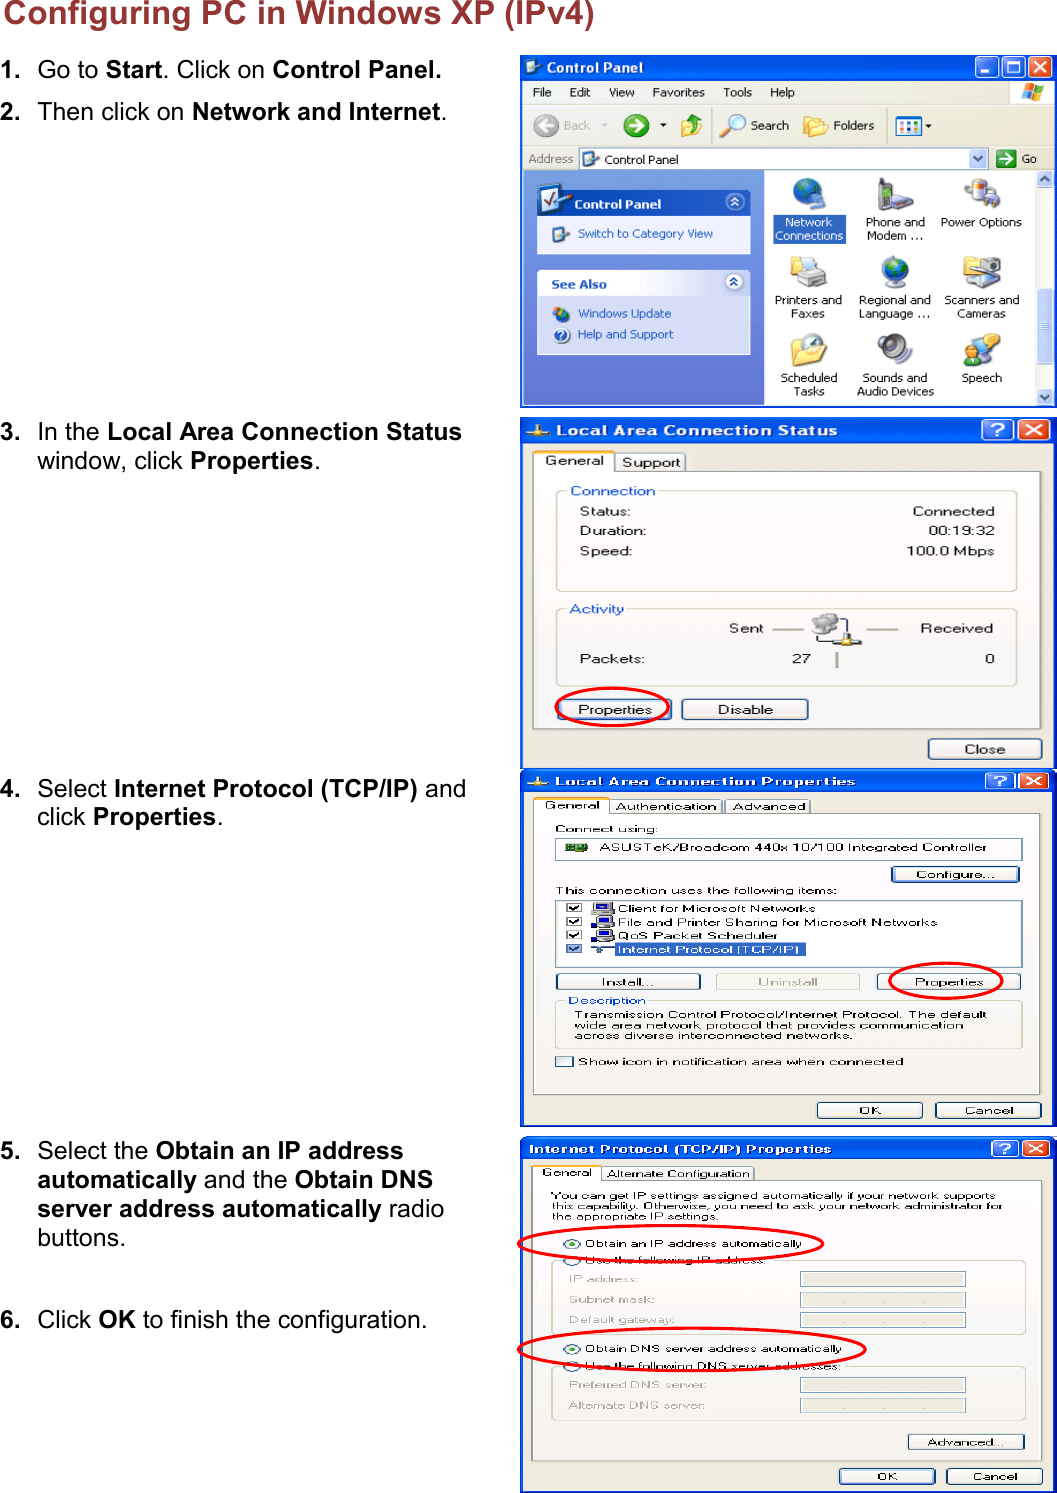    Configuring PC in Windows XP (IPv4) 1. Go to Start. Click on Control Panel. 2. Then click on Network and Internet.   3. In the Local Area Connection Status window, click Properties.  4. Select Internet Protocol (TCP/IP) and click Properties.  5. Select the Obtain an IP address automatically and the Obtain DNS server address automatically radio buttons.  6. Click OK to finish the configuration.   